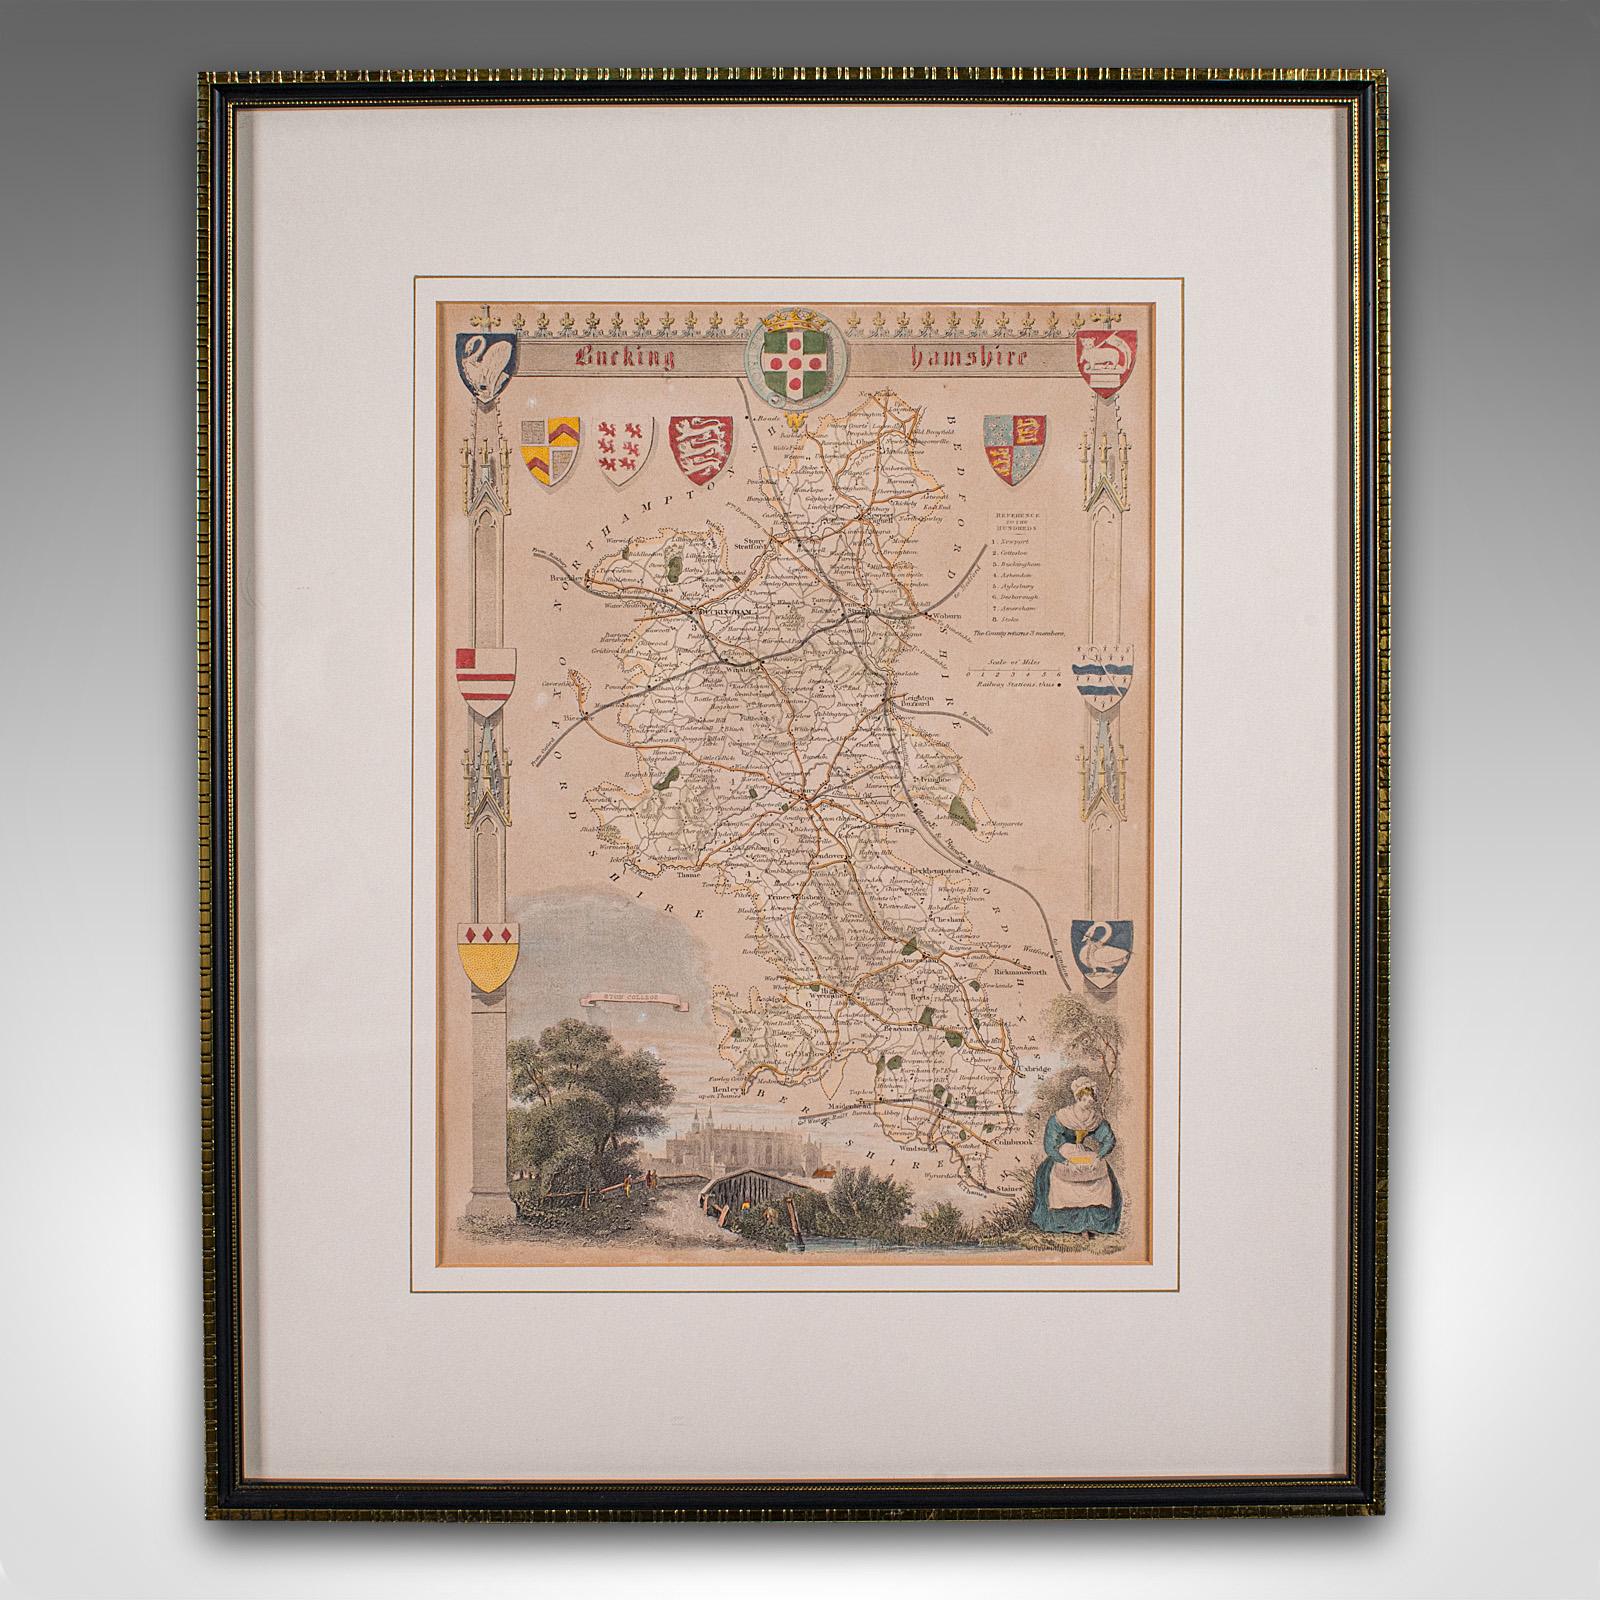 This is an antique lithography map of Buckinghamshire. An English, framed atlas engraving of cartographic interest, dating to the mid 19th century and later.

Superb lithography of Buckinghamshire and its county detail, perfect for